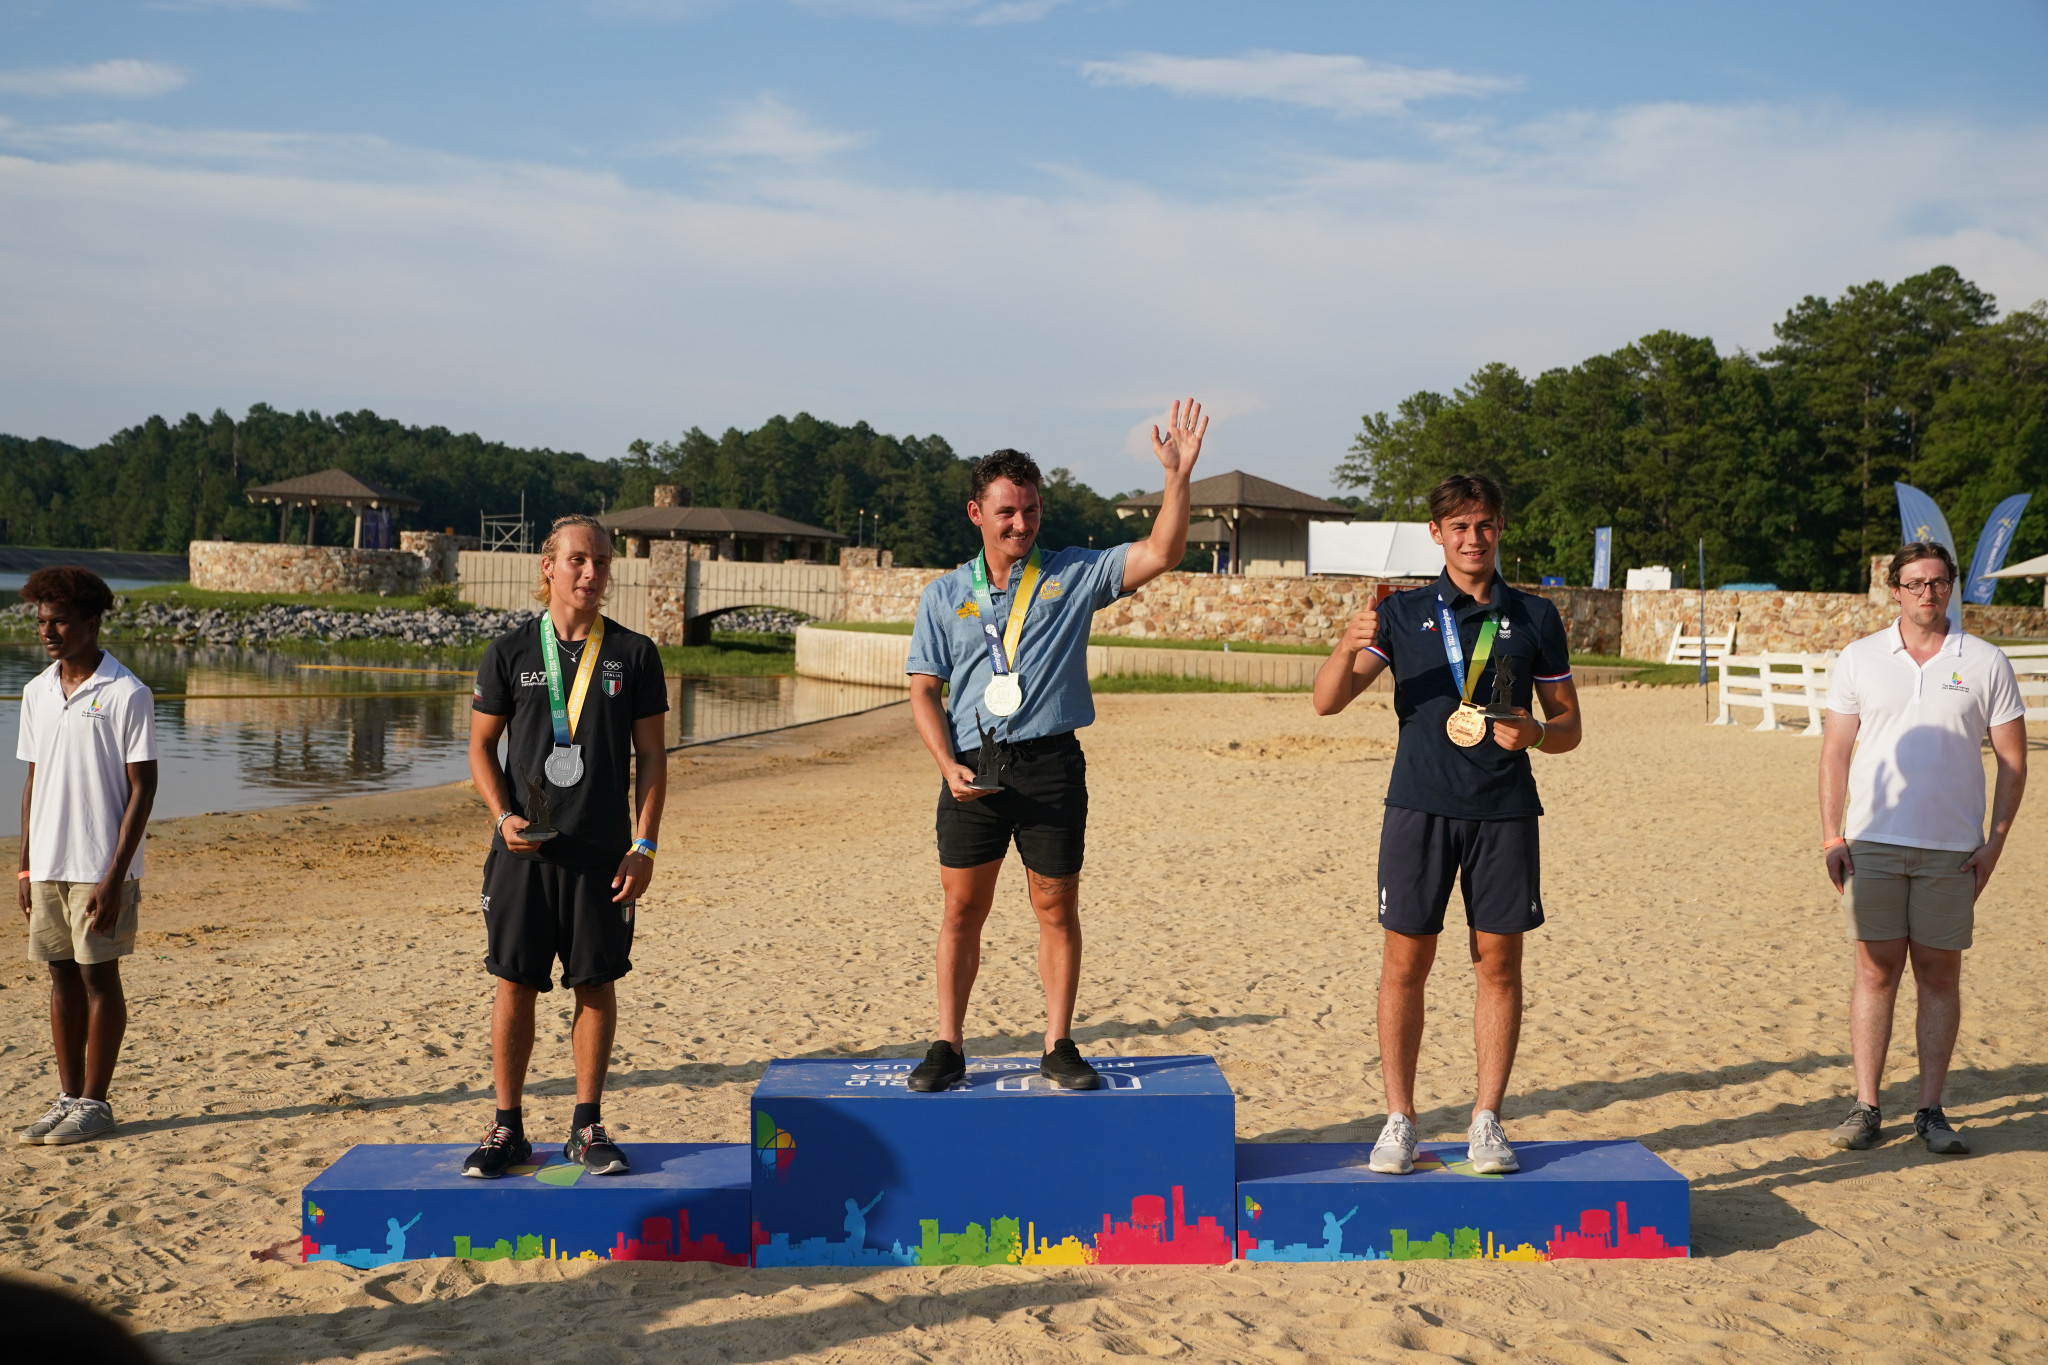 Nic Rapa, centre, topped the podium in the men's wakeboard freestyle ©The World Games 2022/Marvin Gentry